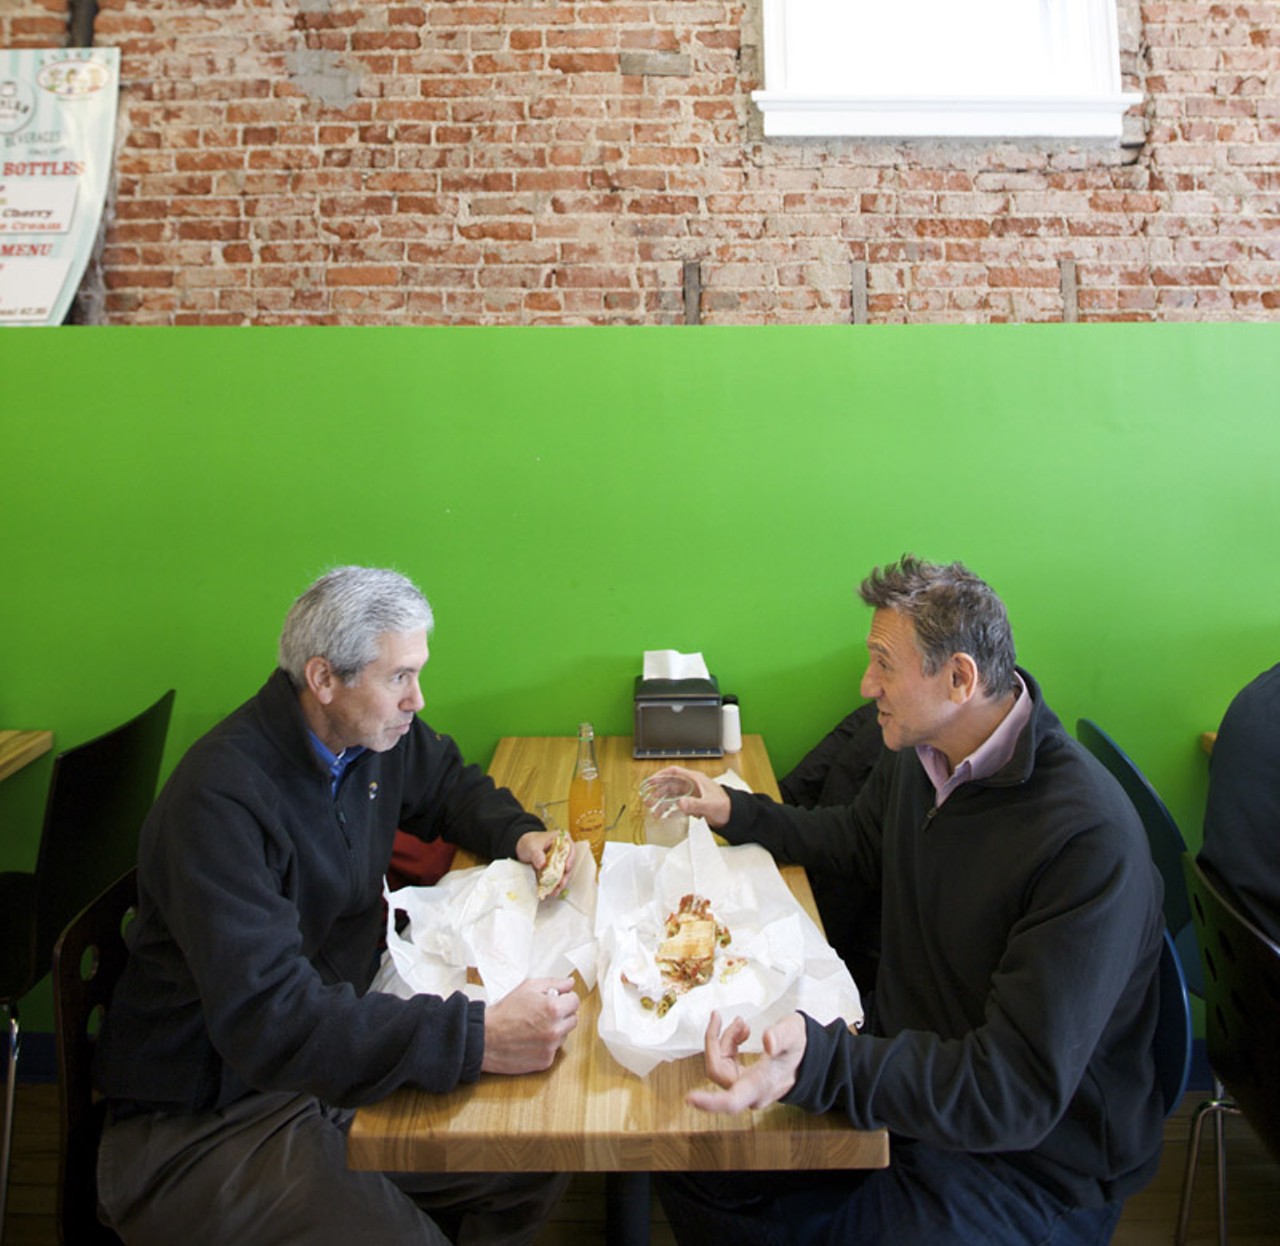 A casual dining environment...on the left is Ira Berkowitz and on the right, Bill Mishk.